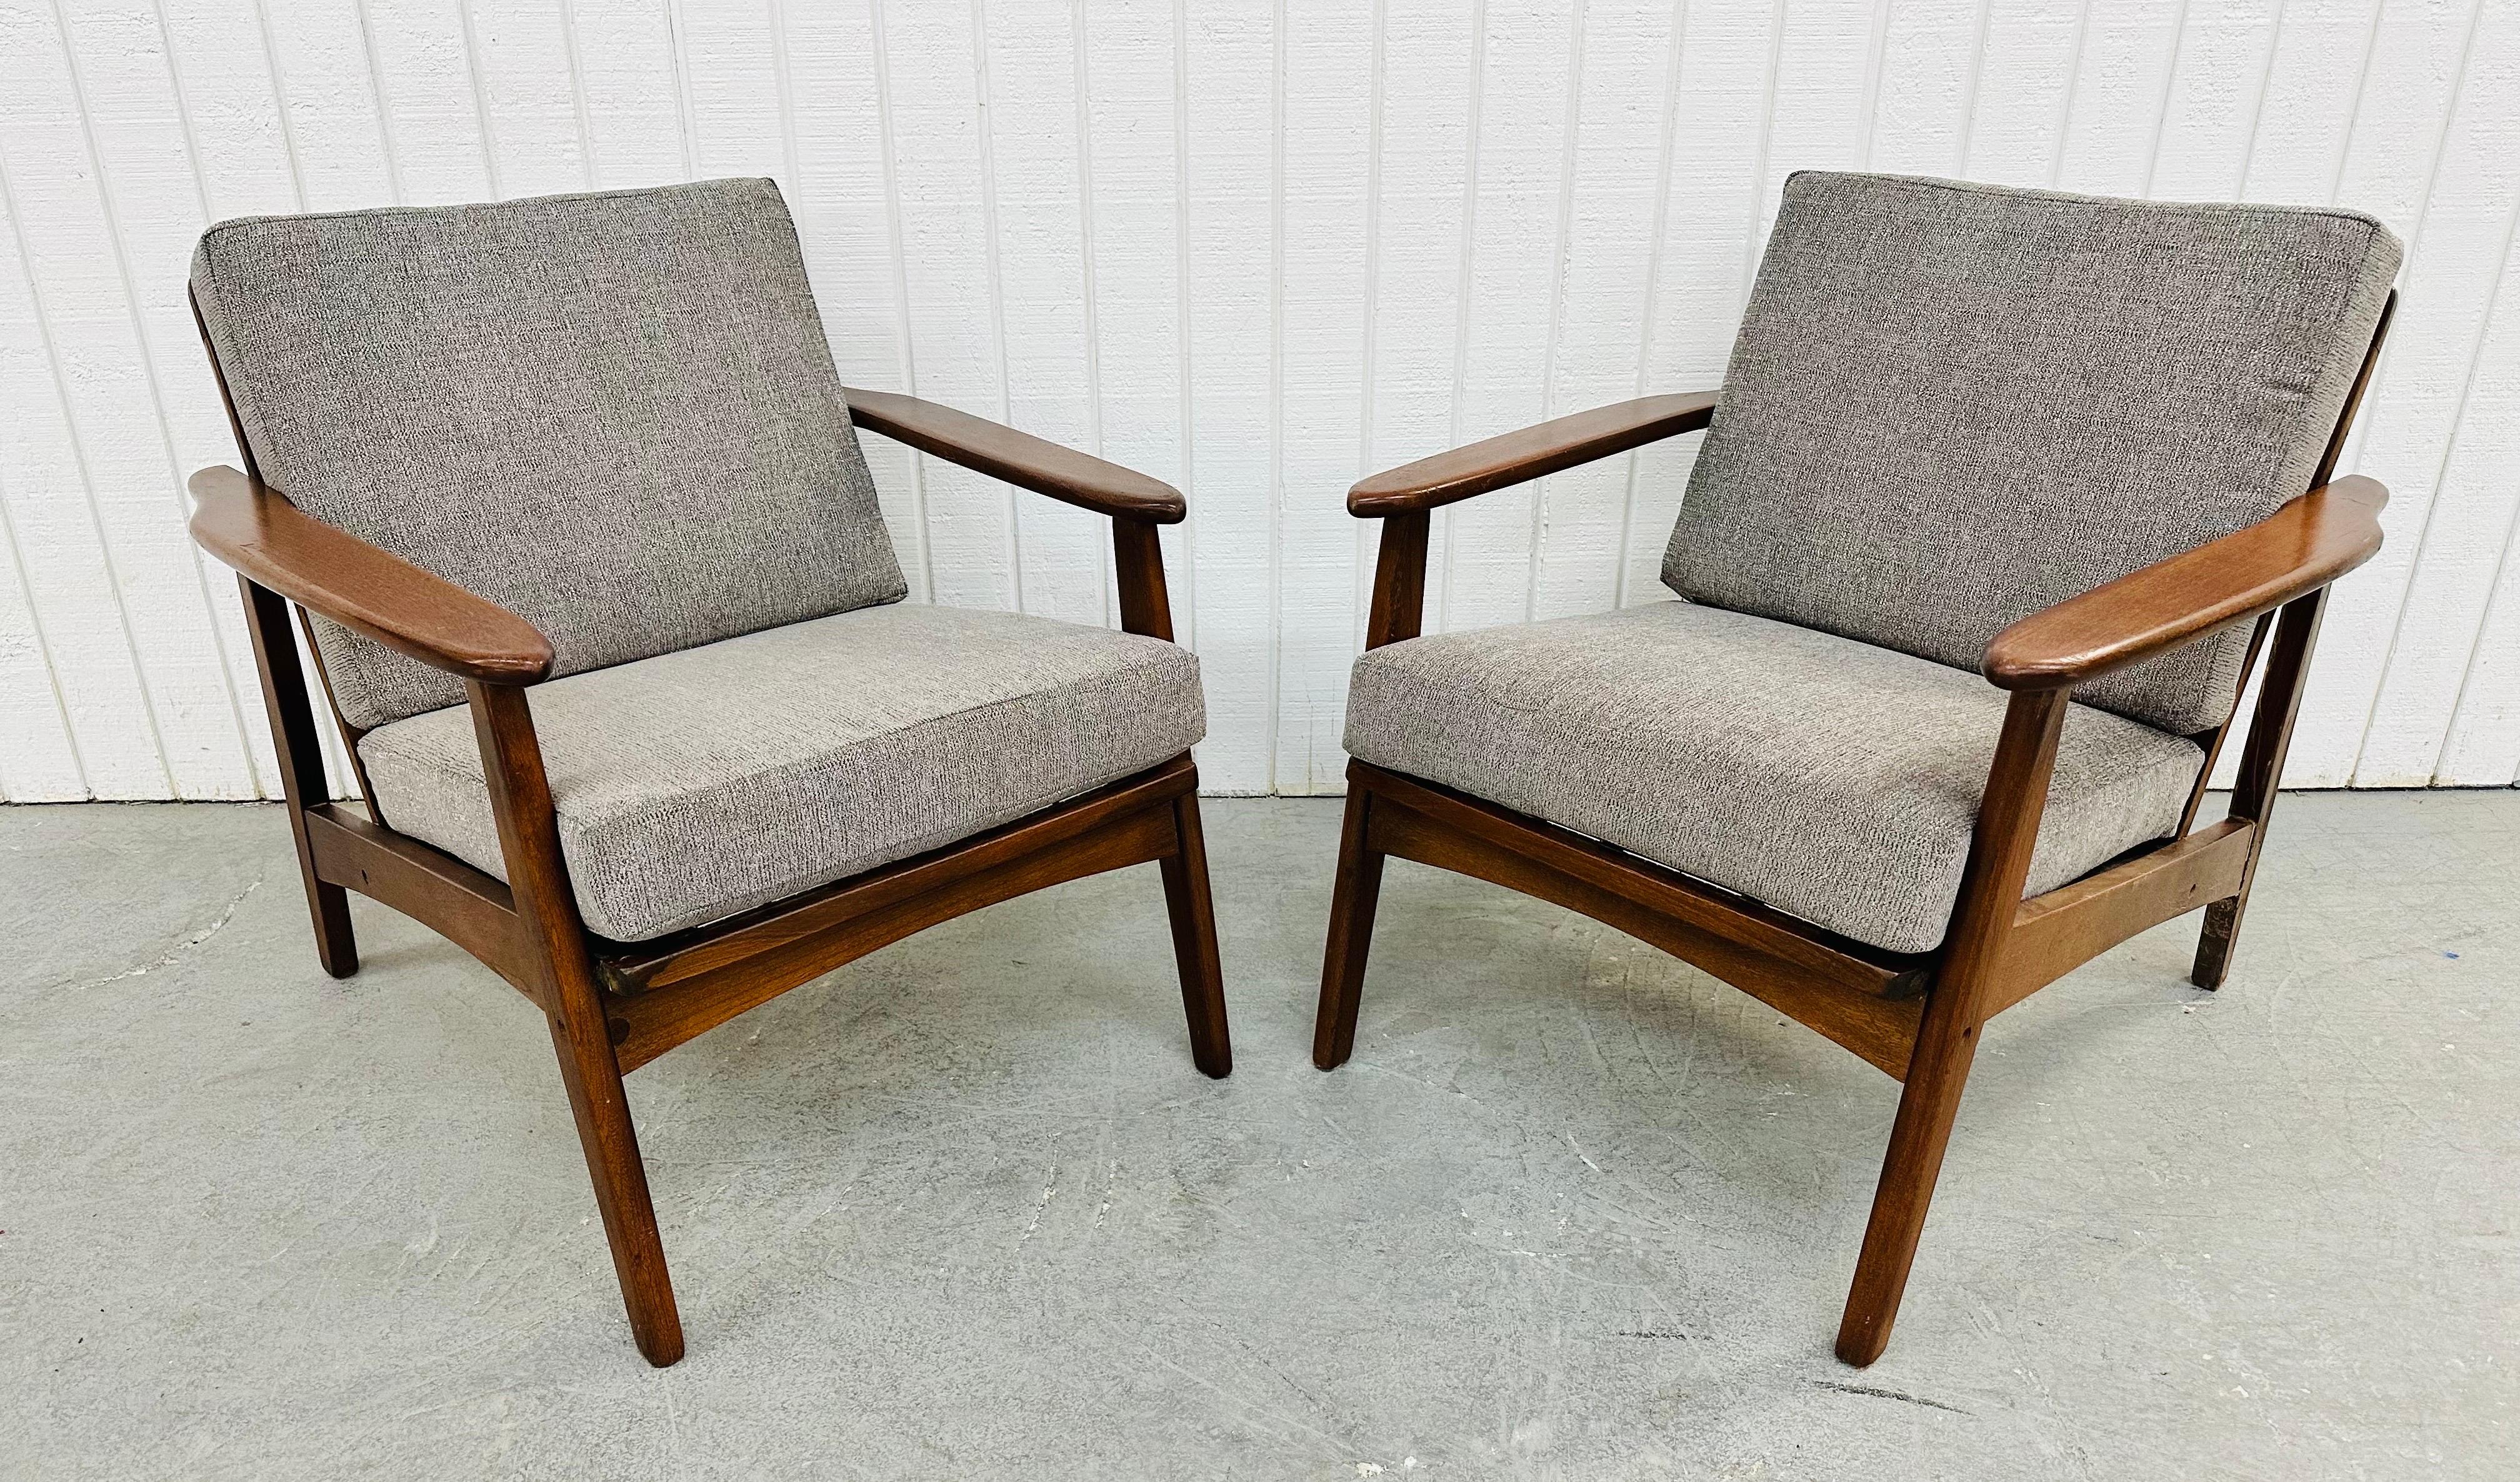 This listing is for a pair of Mid-Century Modern Walnut Lounge Chairs. Featuring solid wood walnut frames, newly upholstered gray cushions, and a spindled back design. This is an exceptional combination of quality and design!